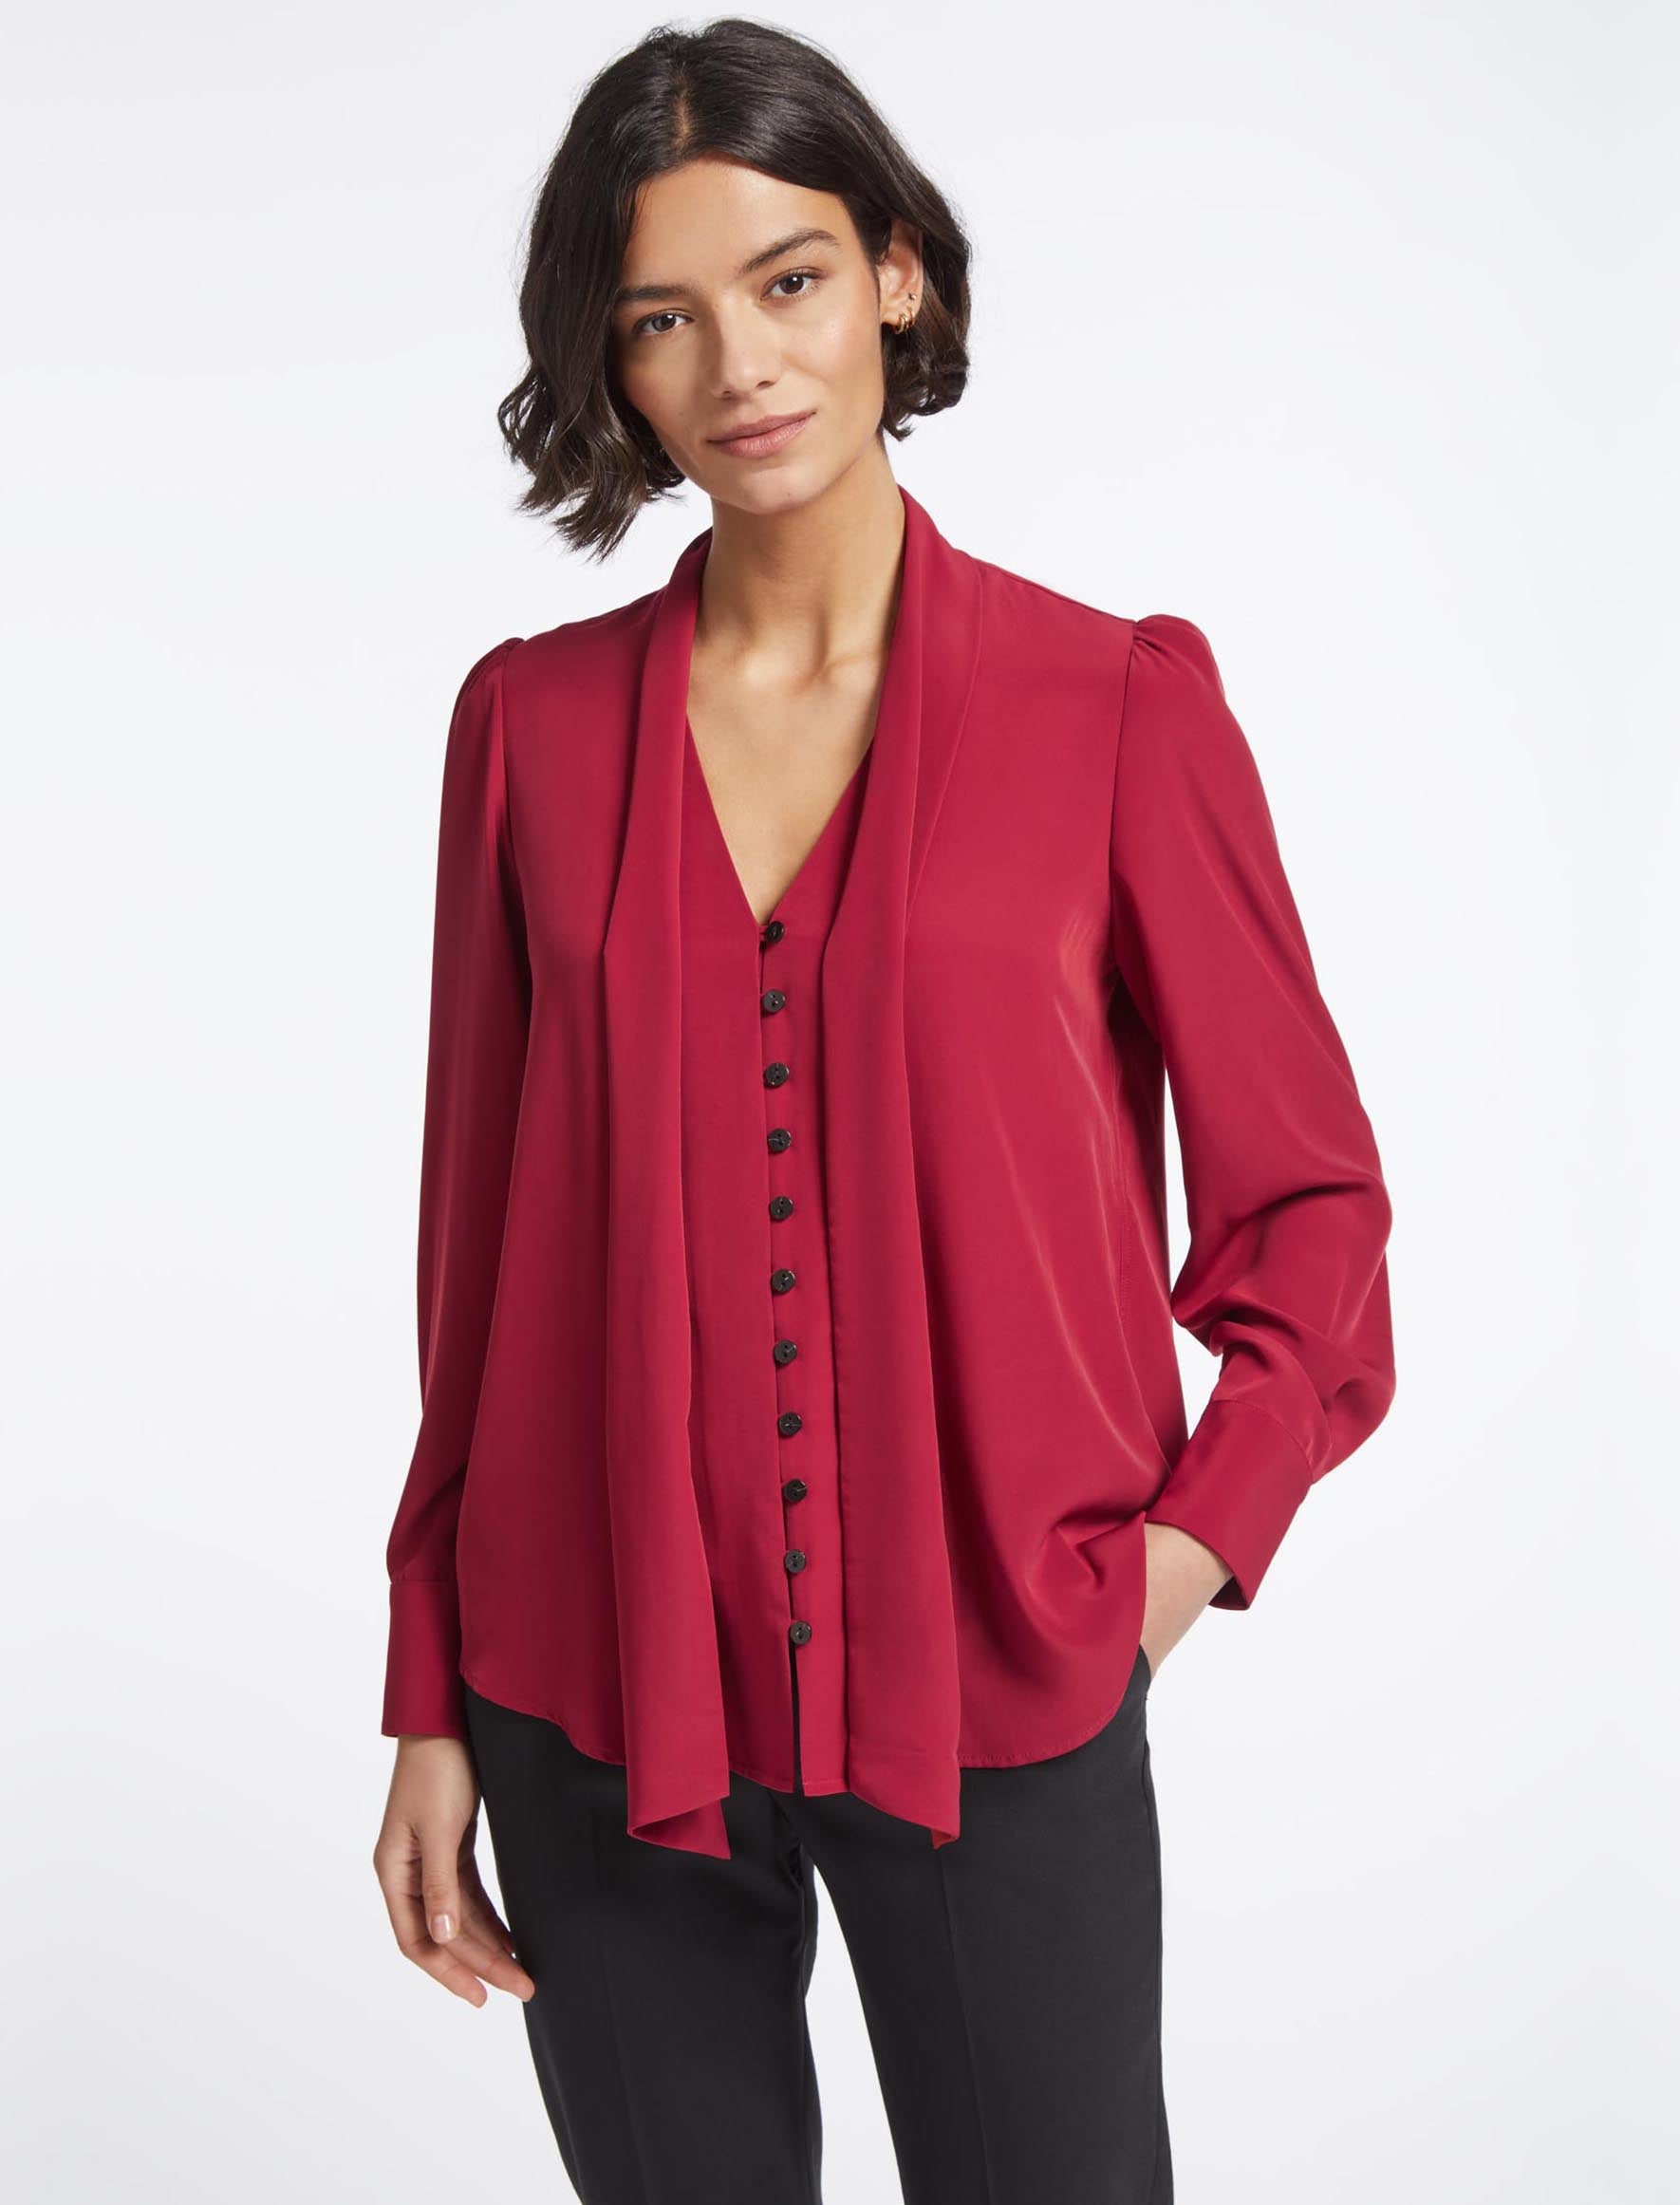 Cefinn Carla Blouse with Scarf - Red